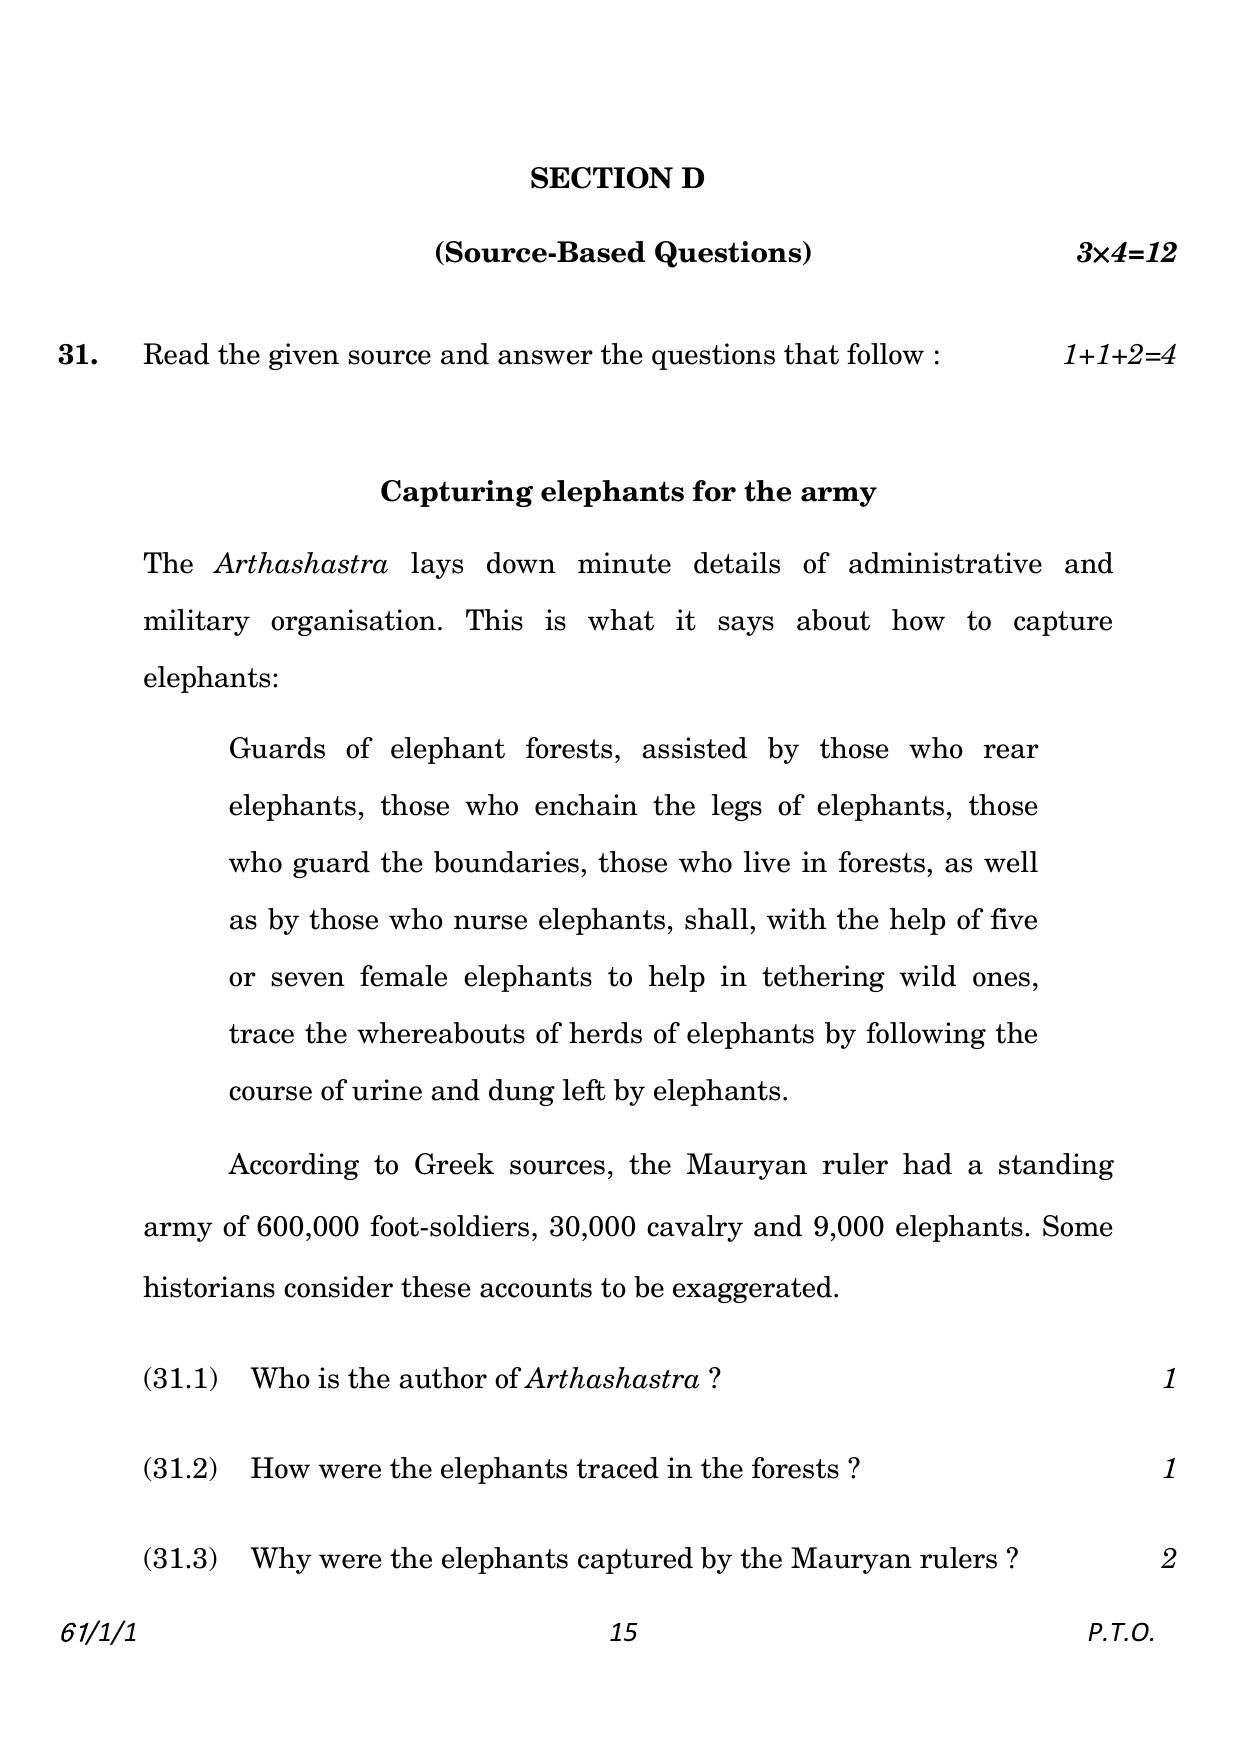 CBSE Class 12 61-1-1 History 2023 Question Paper - Page 15